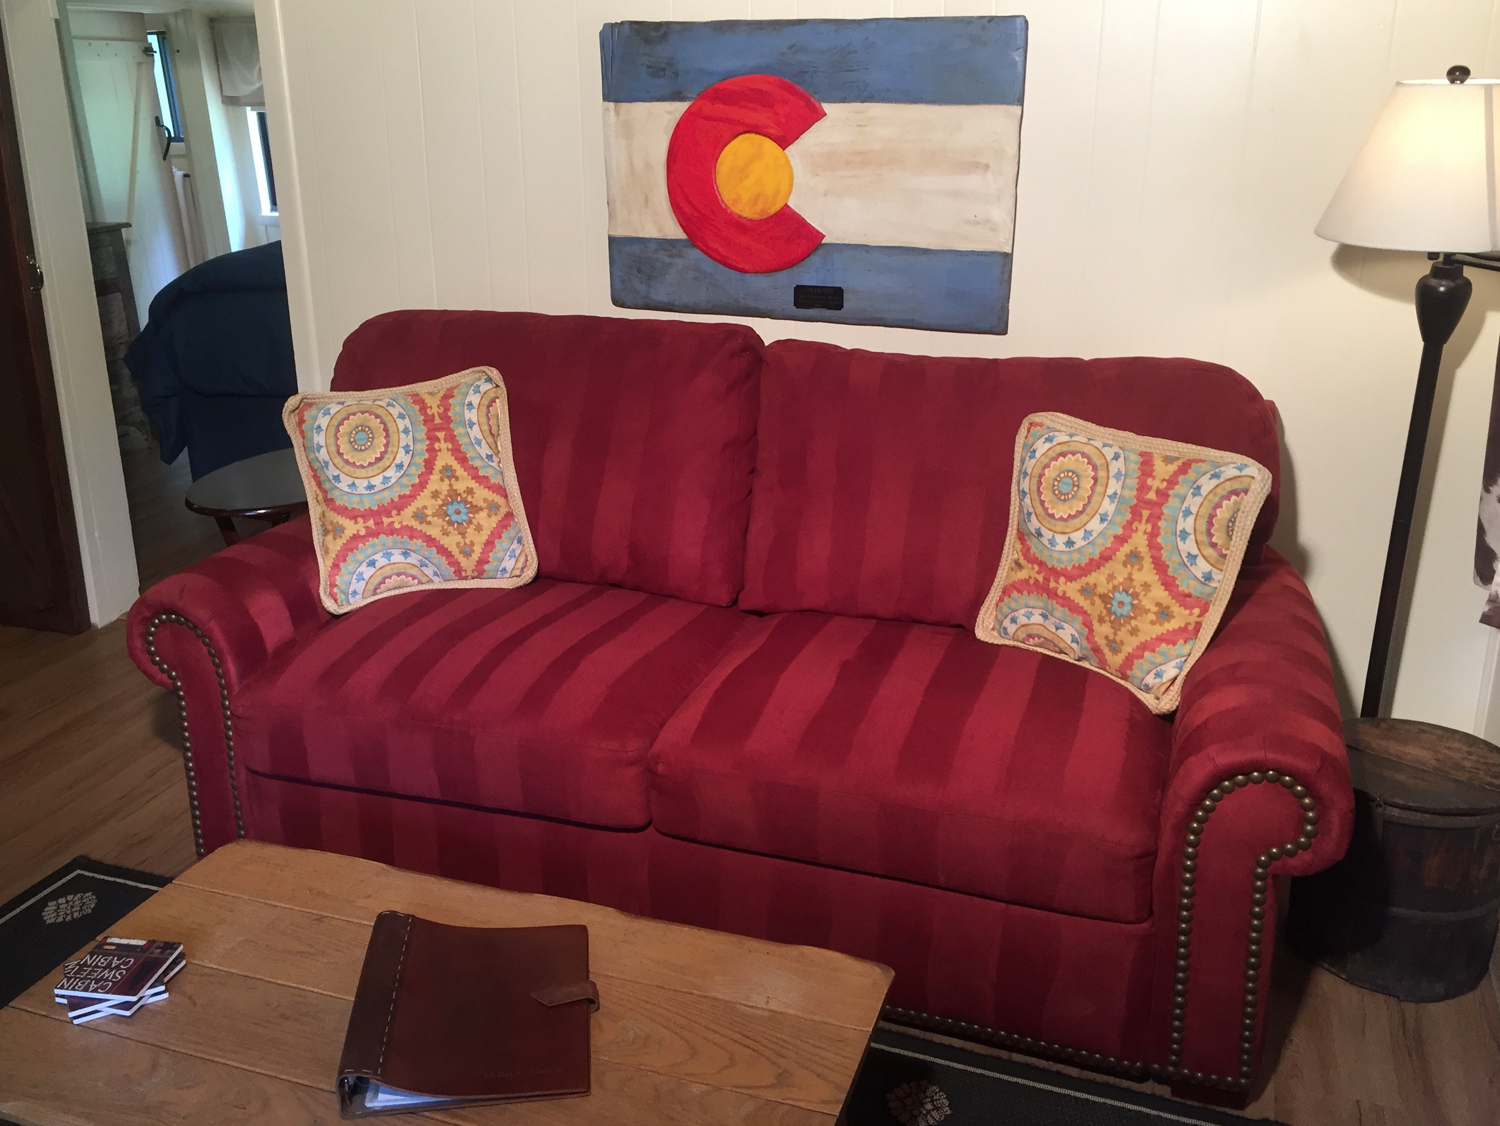 Ponderosa red couch